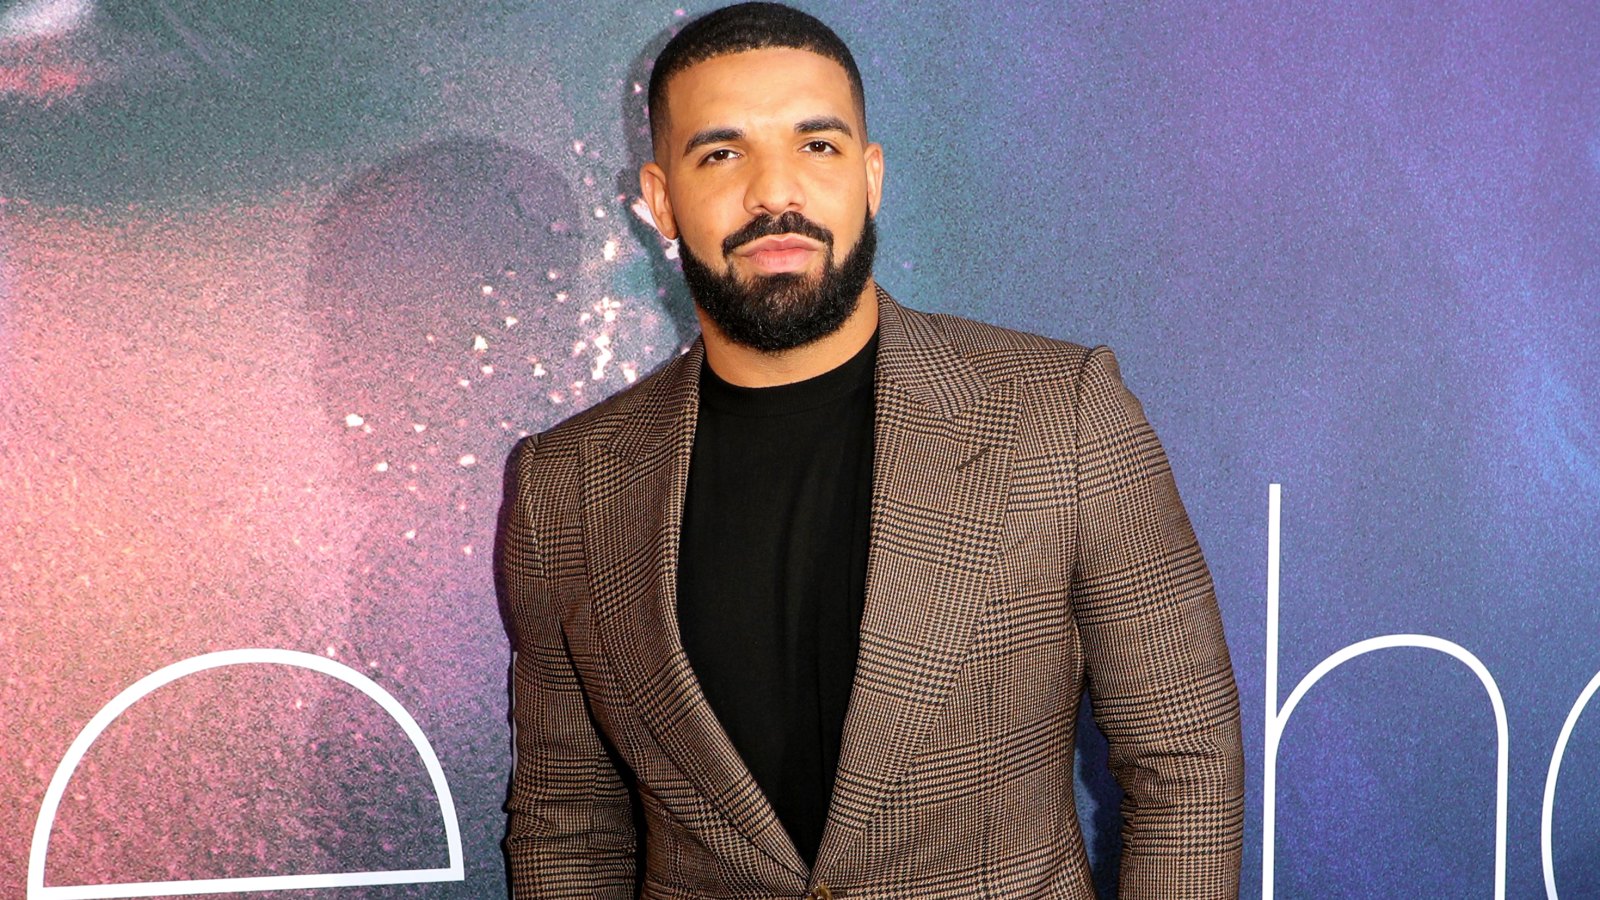 Drake Reveals He Tested Negative for Coronavirus, Says Doctors 'Put That Q-tip All the Way Inside Your Thoughts'